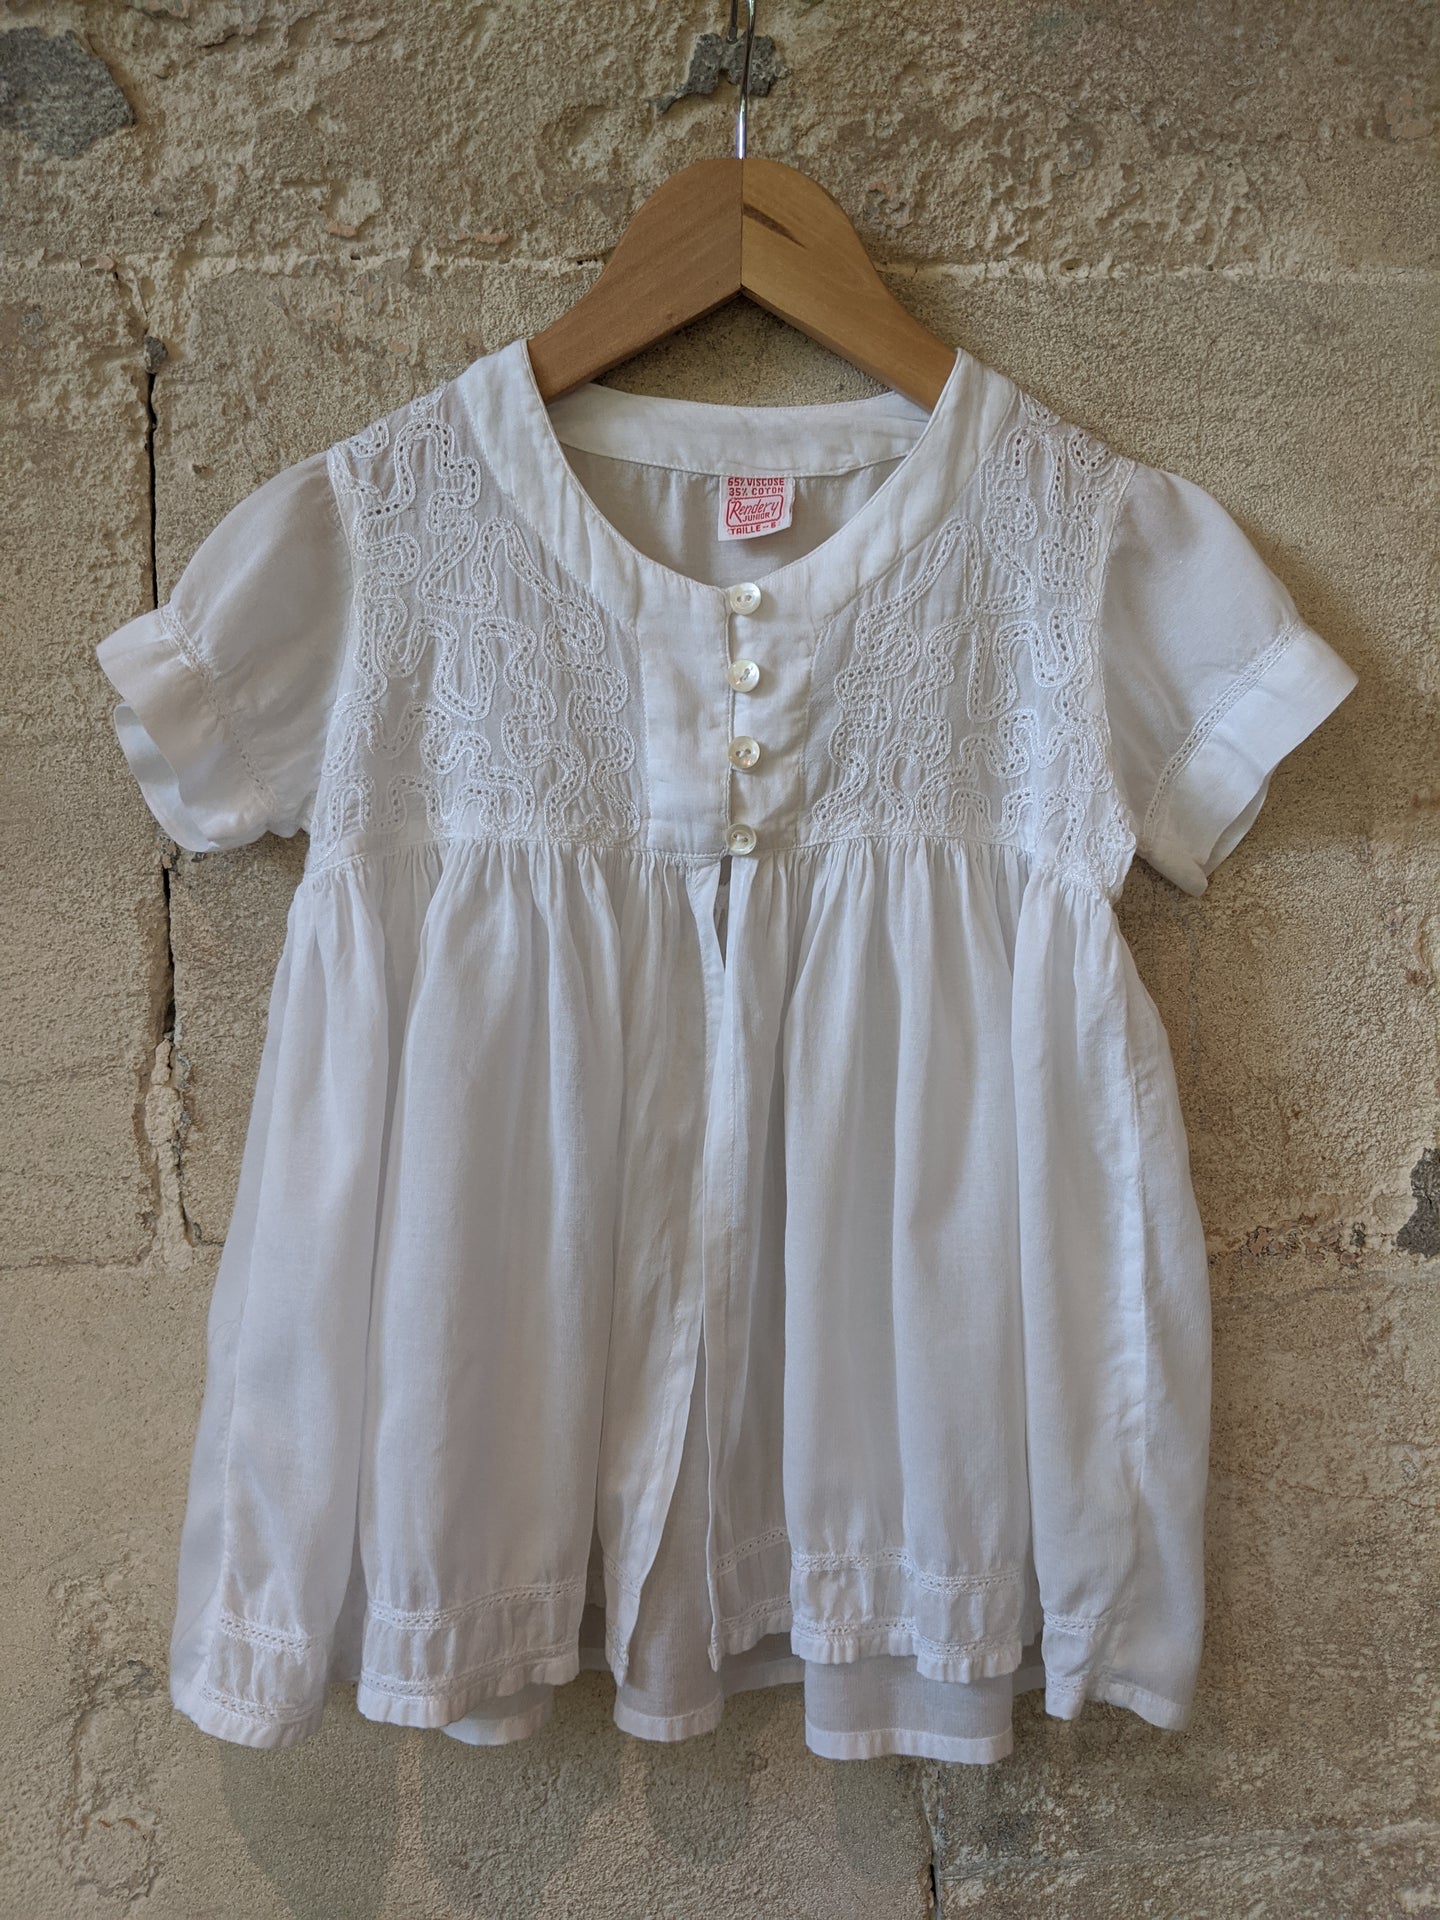 Stunning Light Floaty French Blouse - 6 Years – Monkey Threads Preloved